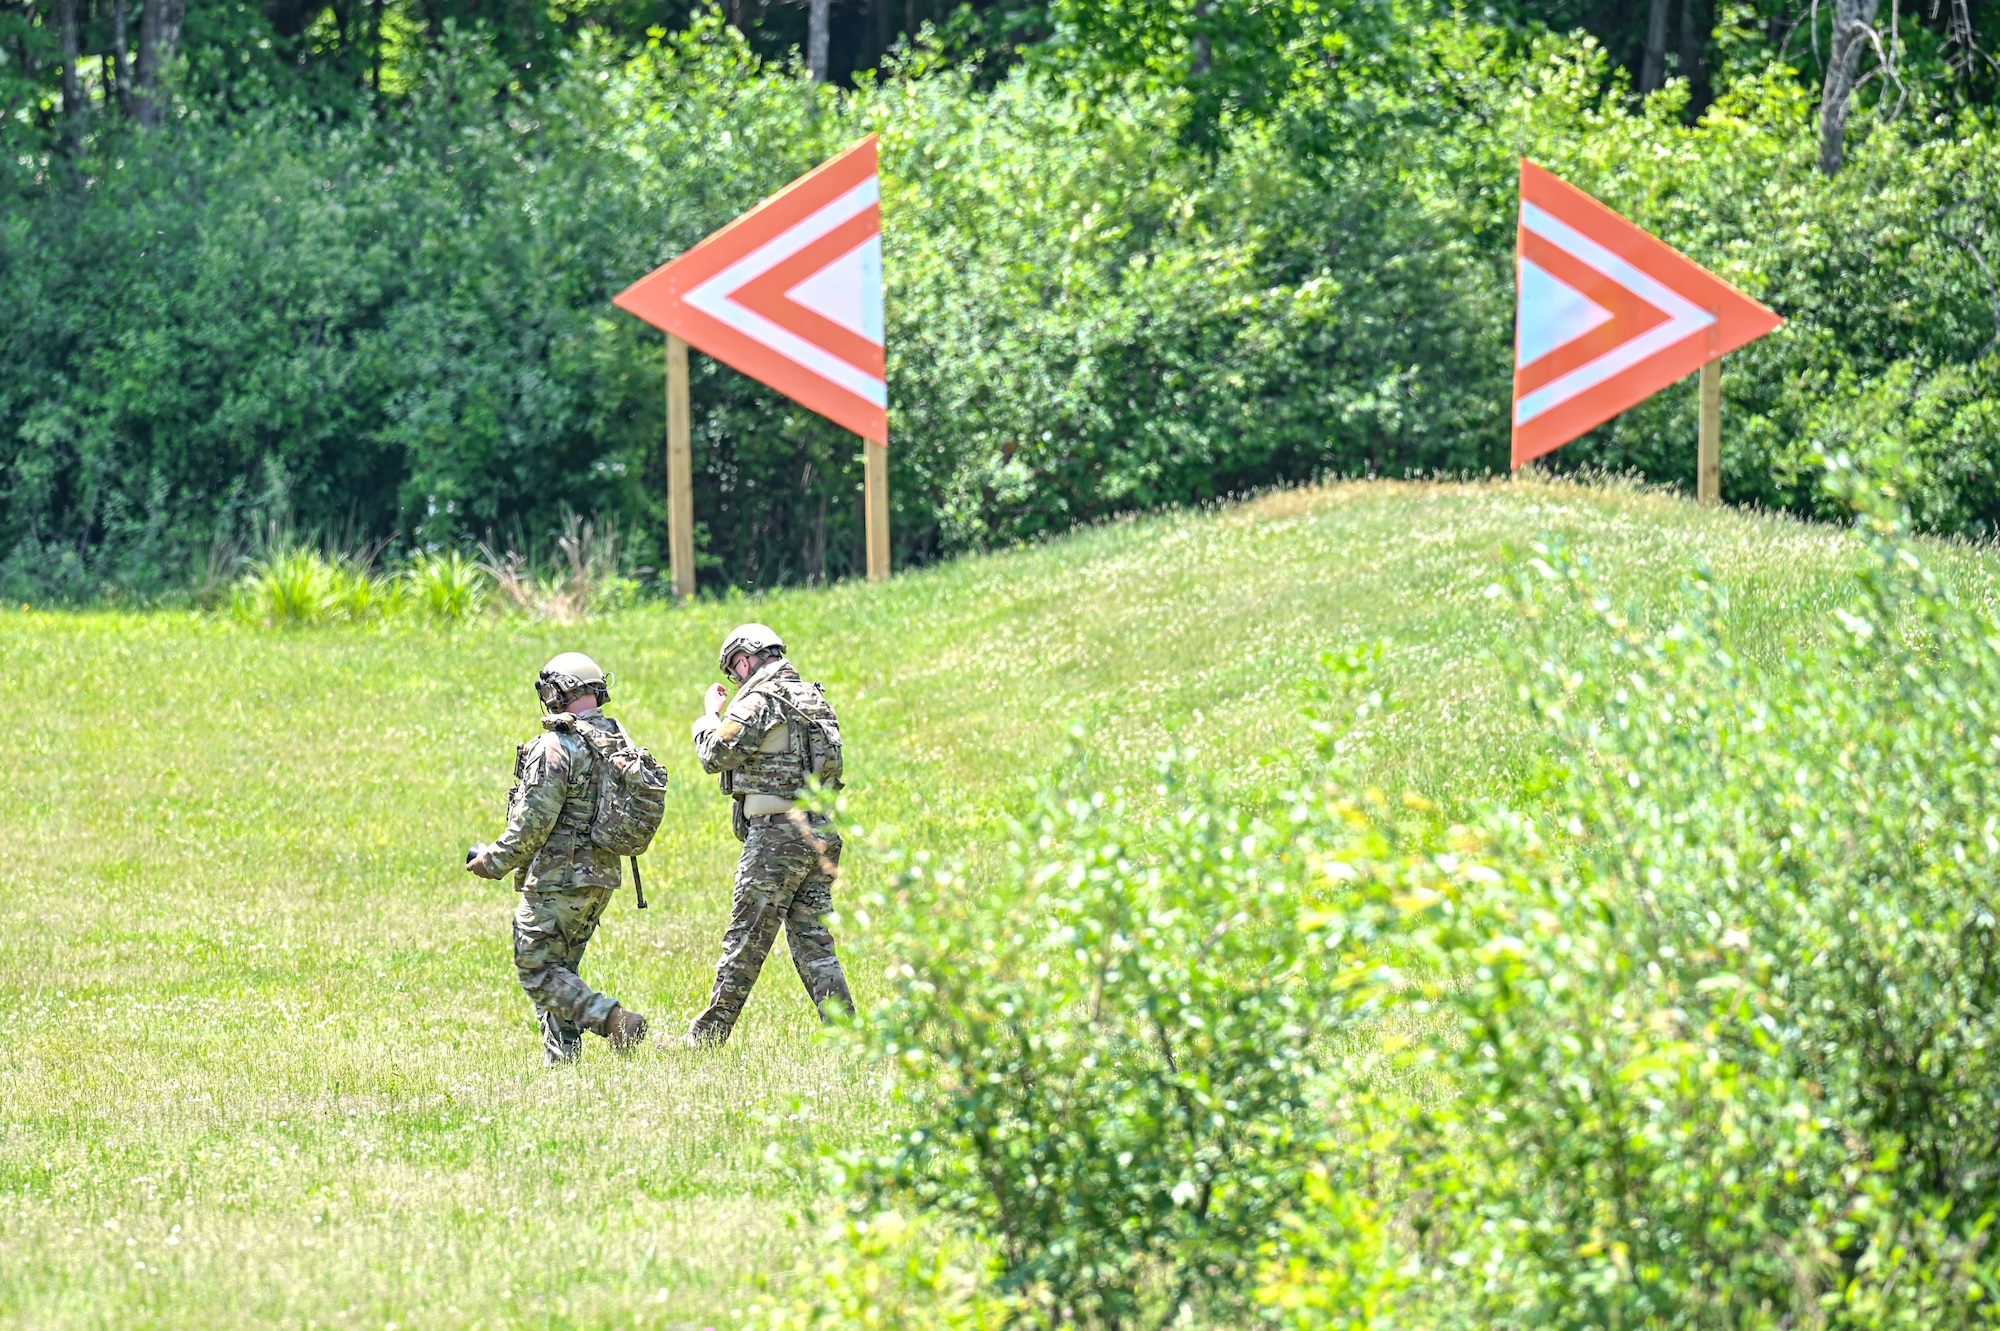 Tech. Sgt. Allen Russell, an Integrated Defense Leadership Course cadre member assigned to the 910th Security Forces Squadron, Youngstown Air Reserve Station, Ohio, and Senior Master Sgt. Jason Knepper, Air Force Reserve Command Security Forces training manager, walk toward a bunker to detonate live grenades on May 31, 2023, at Camp James A. Garfield Joint Military Training Center, Ohio.